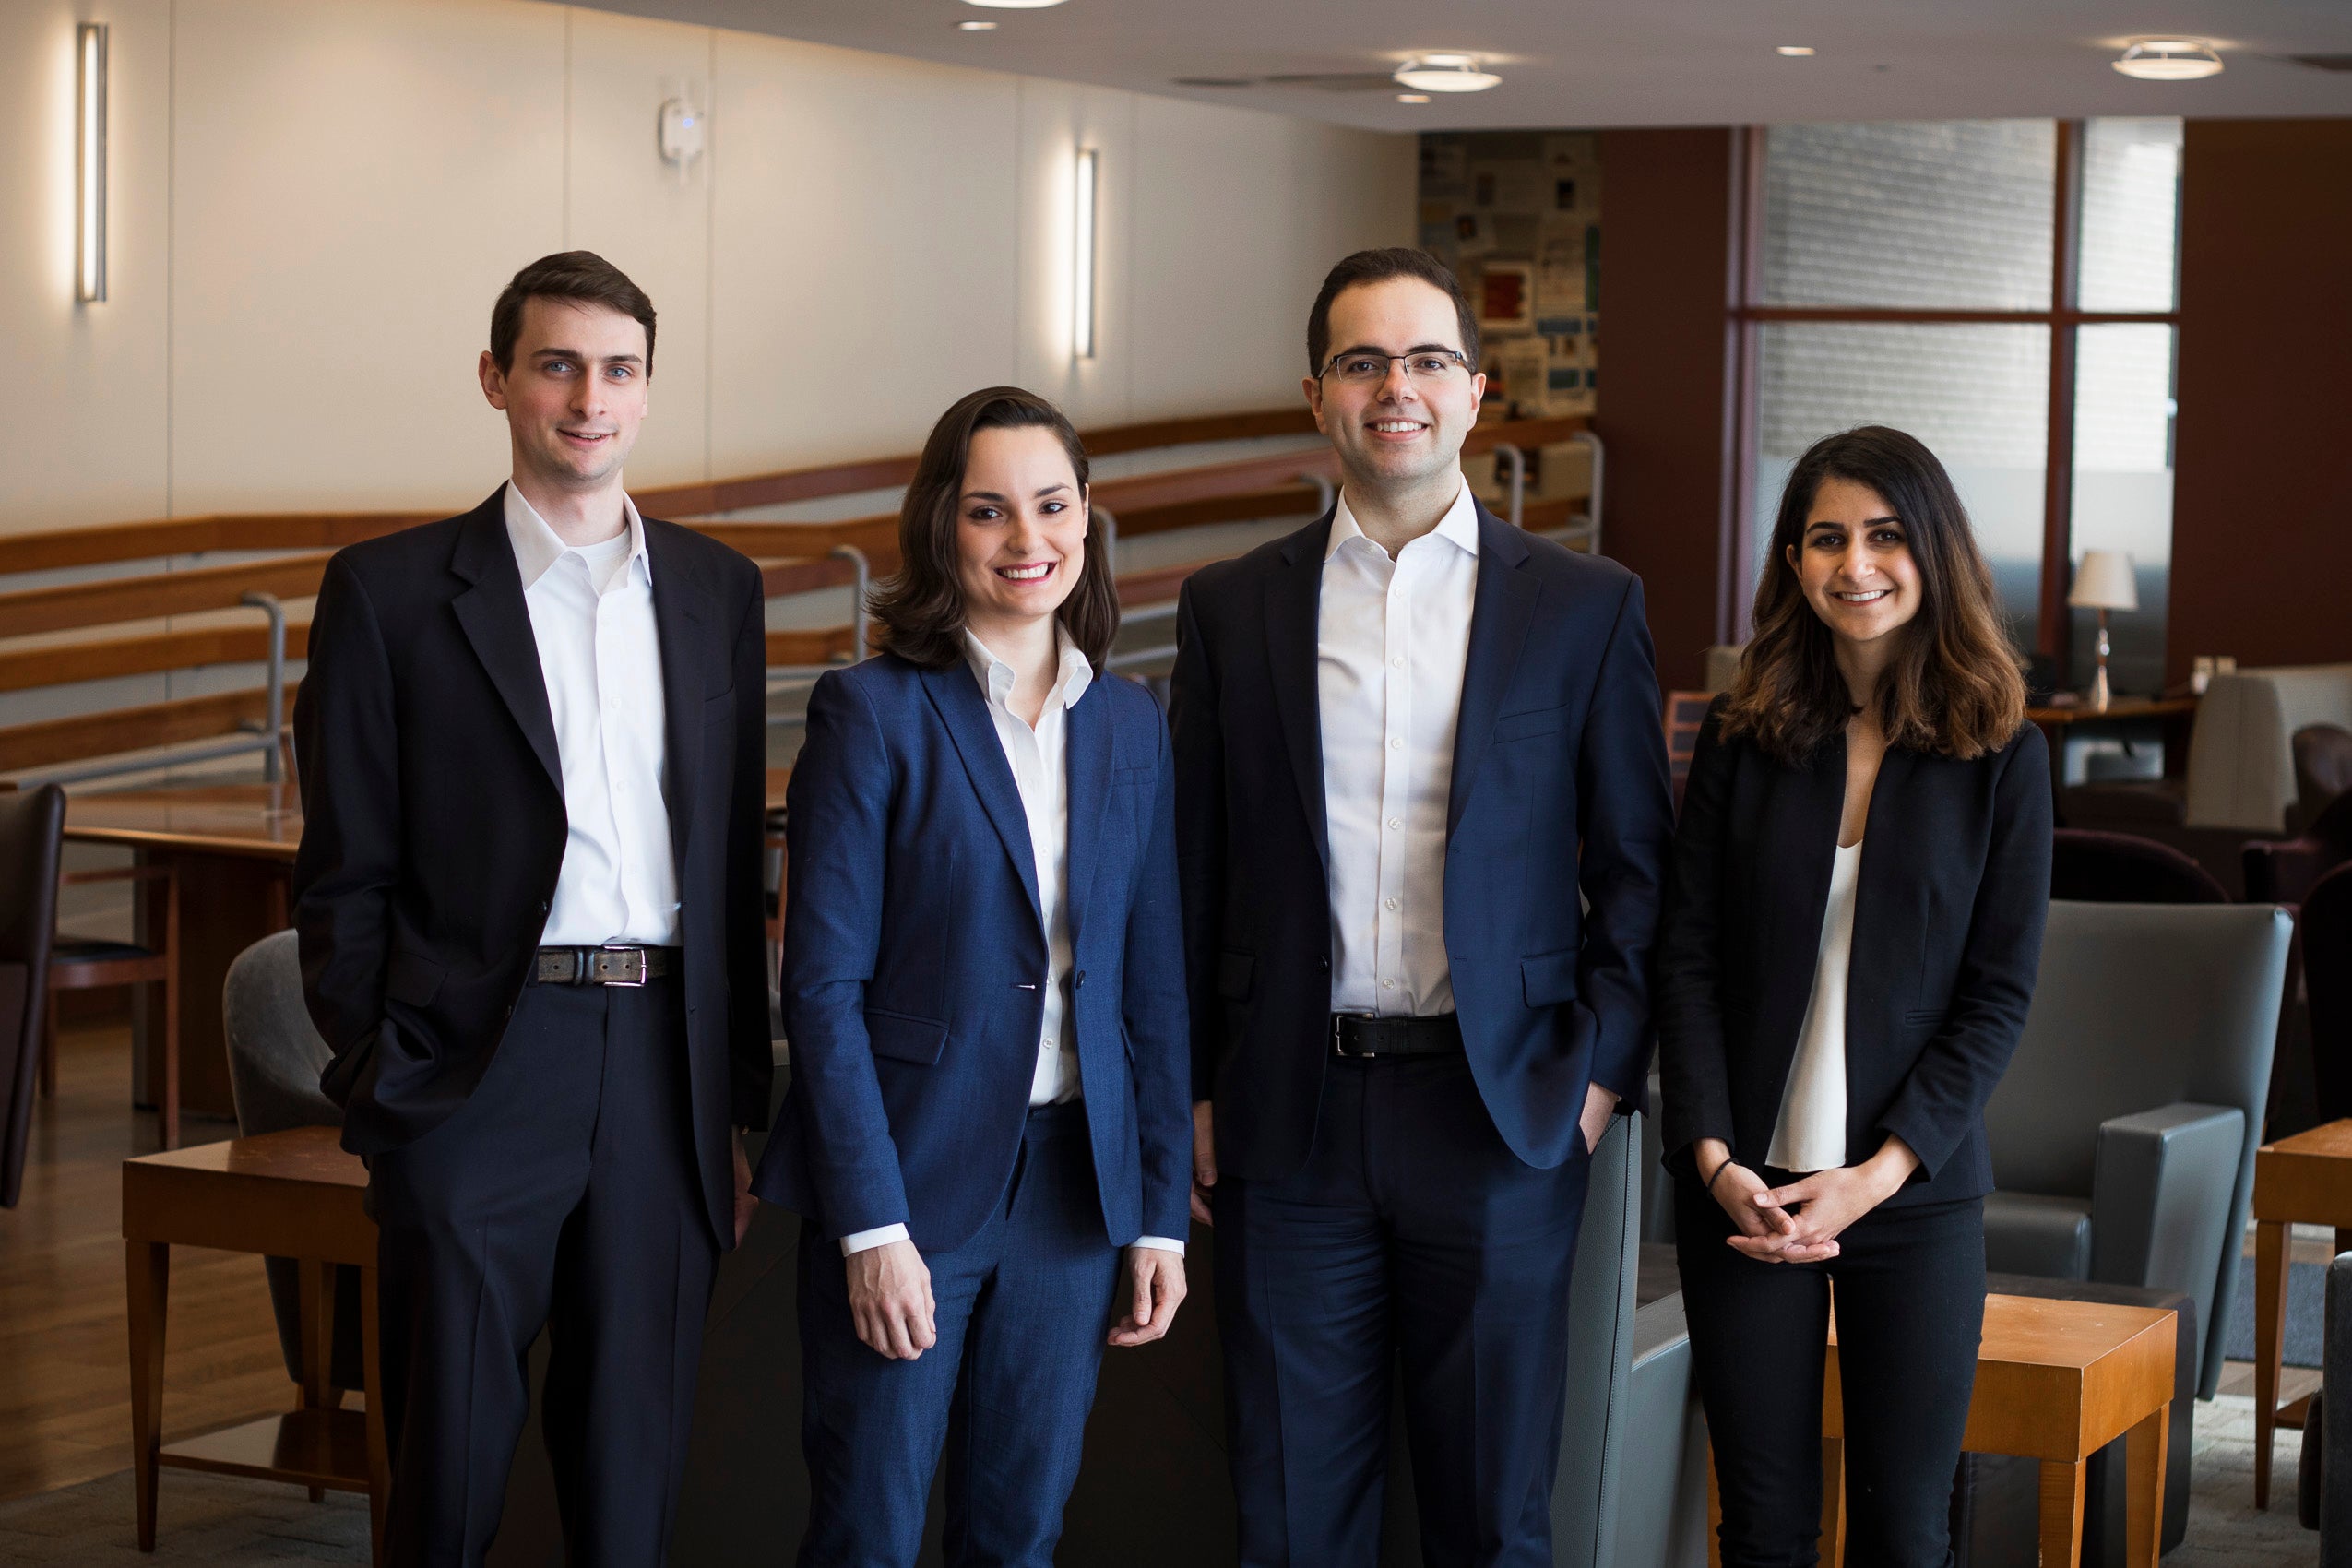 Cravath Fellows pursue law projects around the world